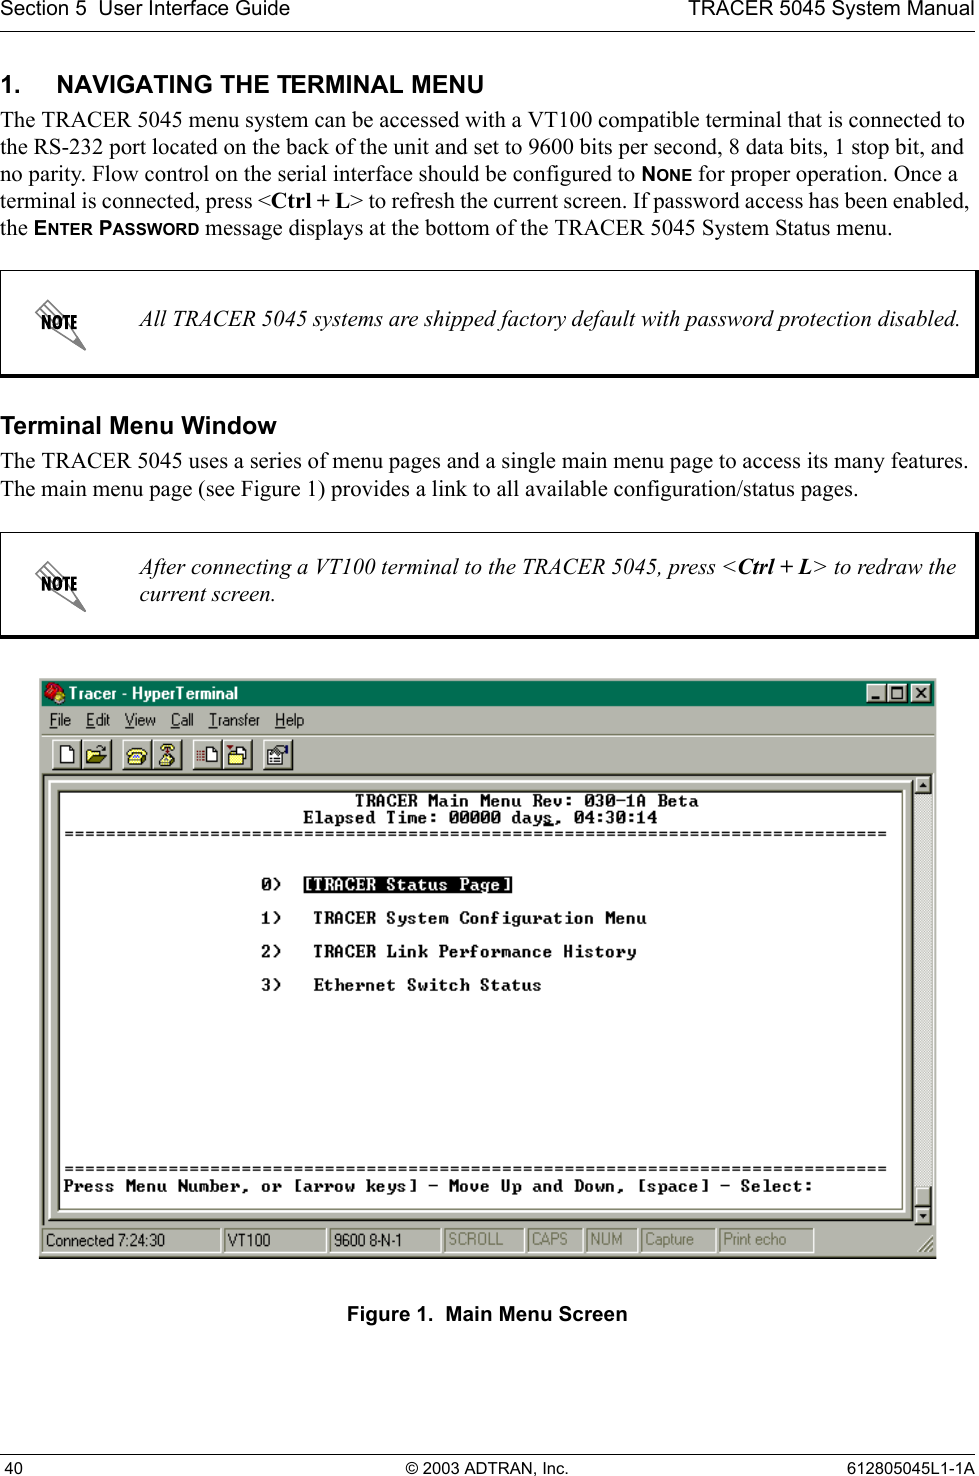 Section 5  User Interface Guide TRACER 5045 System Manual 40 © 2003 ADTRAN, Inc. 612805045L1-1A1. NAVIGATING THE TERMINAL MENUThe TRACER 5045 menu system can be accessed with a VT100 compatible terminal that is connected to the RS-232 port located on the back of the unit and set to 9600 bits per second, 8 data bits, 1 stop bit, and no parity. Flow control on the serial interface should be configured to NONE for proper operation. Once a terminal is connected, press &lt;Ctrl + L&gt; to refresh the current screen. If password access has been enabled, the ENTER PASSWORD message displays at the bottom of the TRACER 5045 System Status menu. Terminal Menu WindowThe TRACER 5045 uses a series of menu pages and a single main menu page to access its many features. The main menu page (see Figure 1) provides a link to all available configuration/status pages.Figure 1.  Main Menu ScreenAll TRACER 5045 systems are shipped factory default with password protection disabled.After connecting a VT100 terminal to the TRACER 5045, press &lt;Ctrl + L&gt; to redraw the current screen.